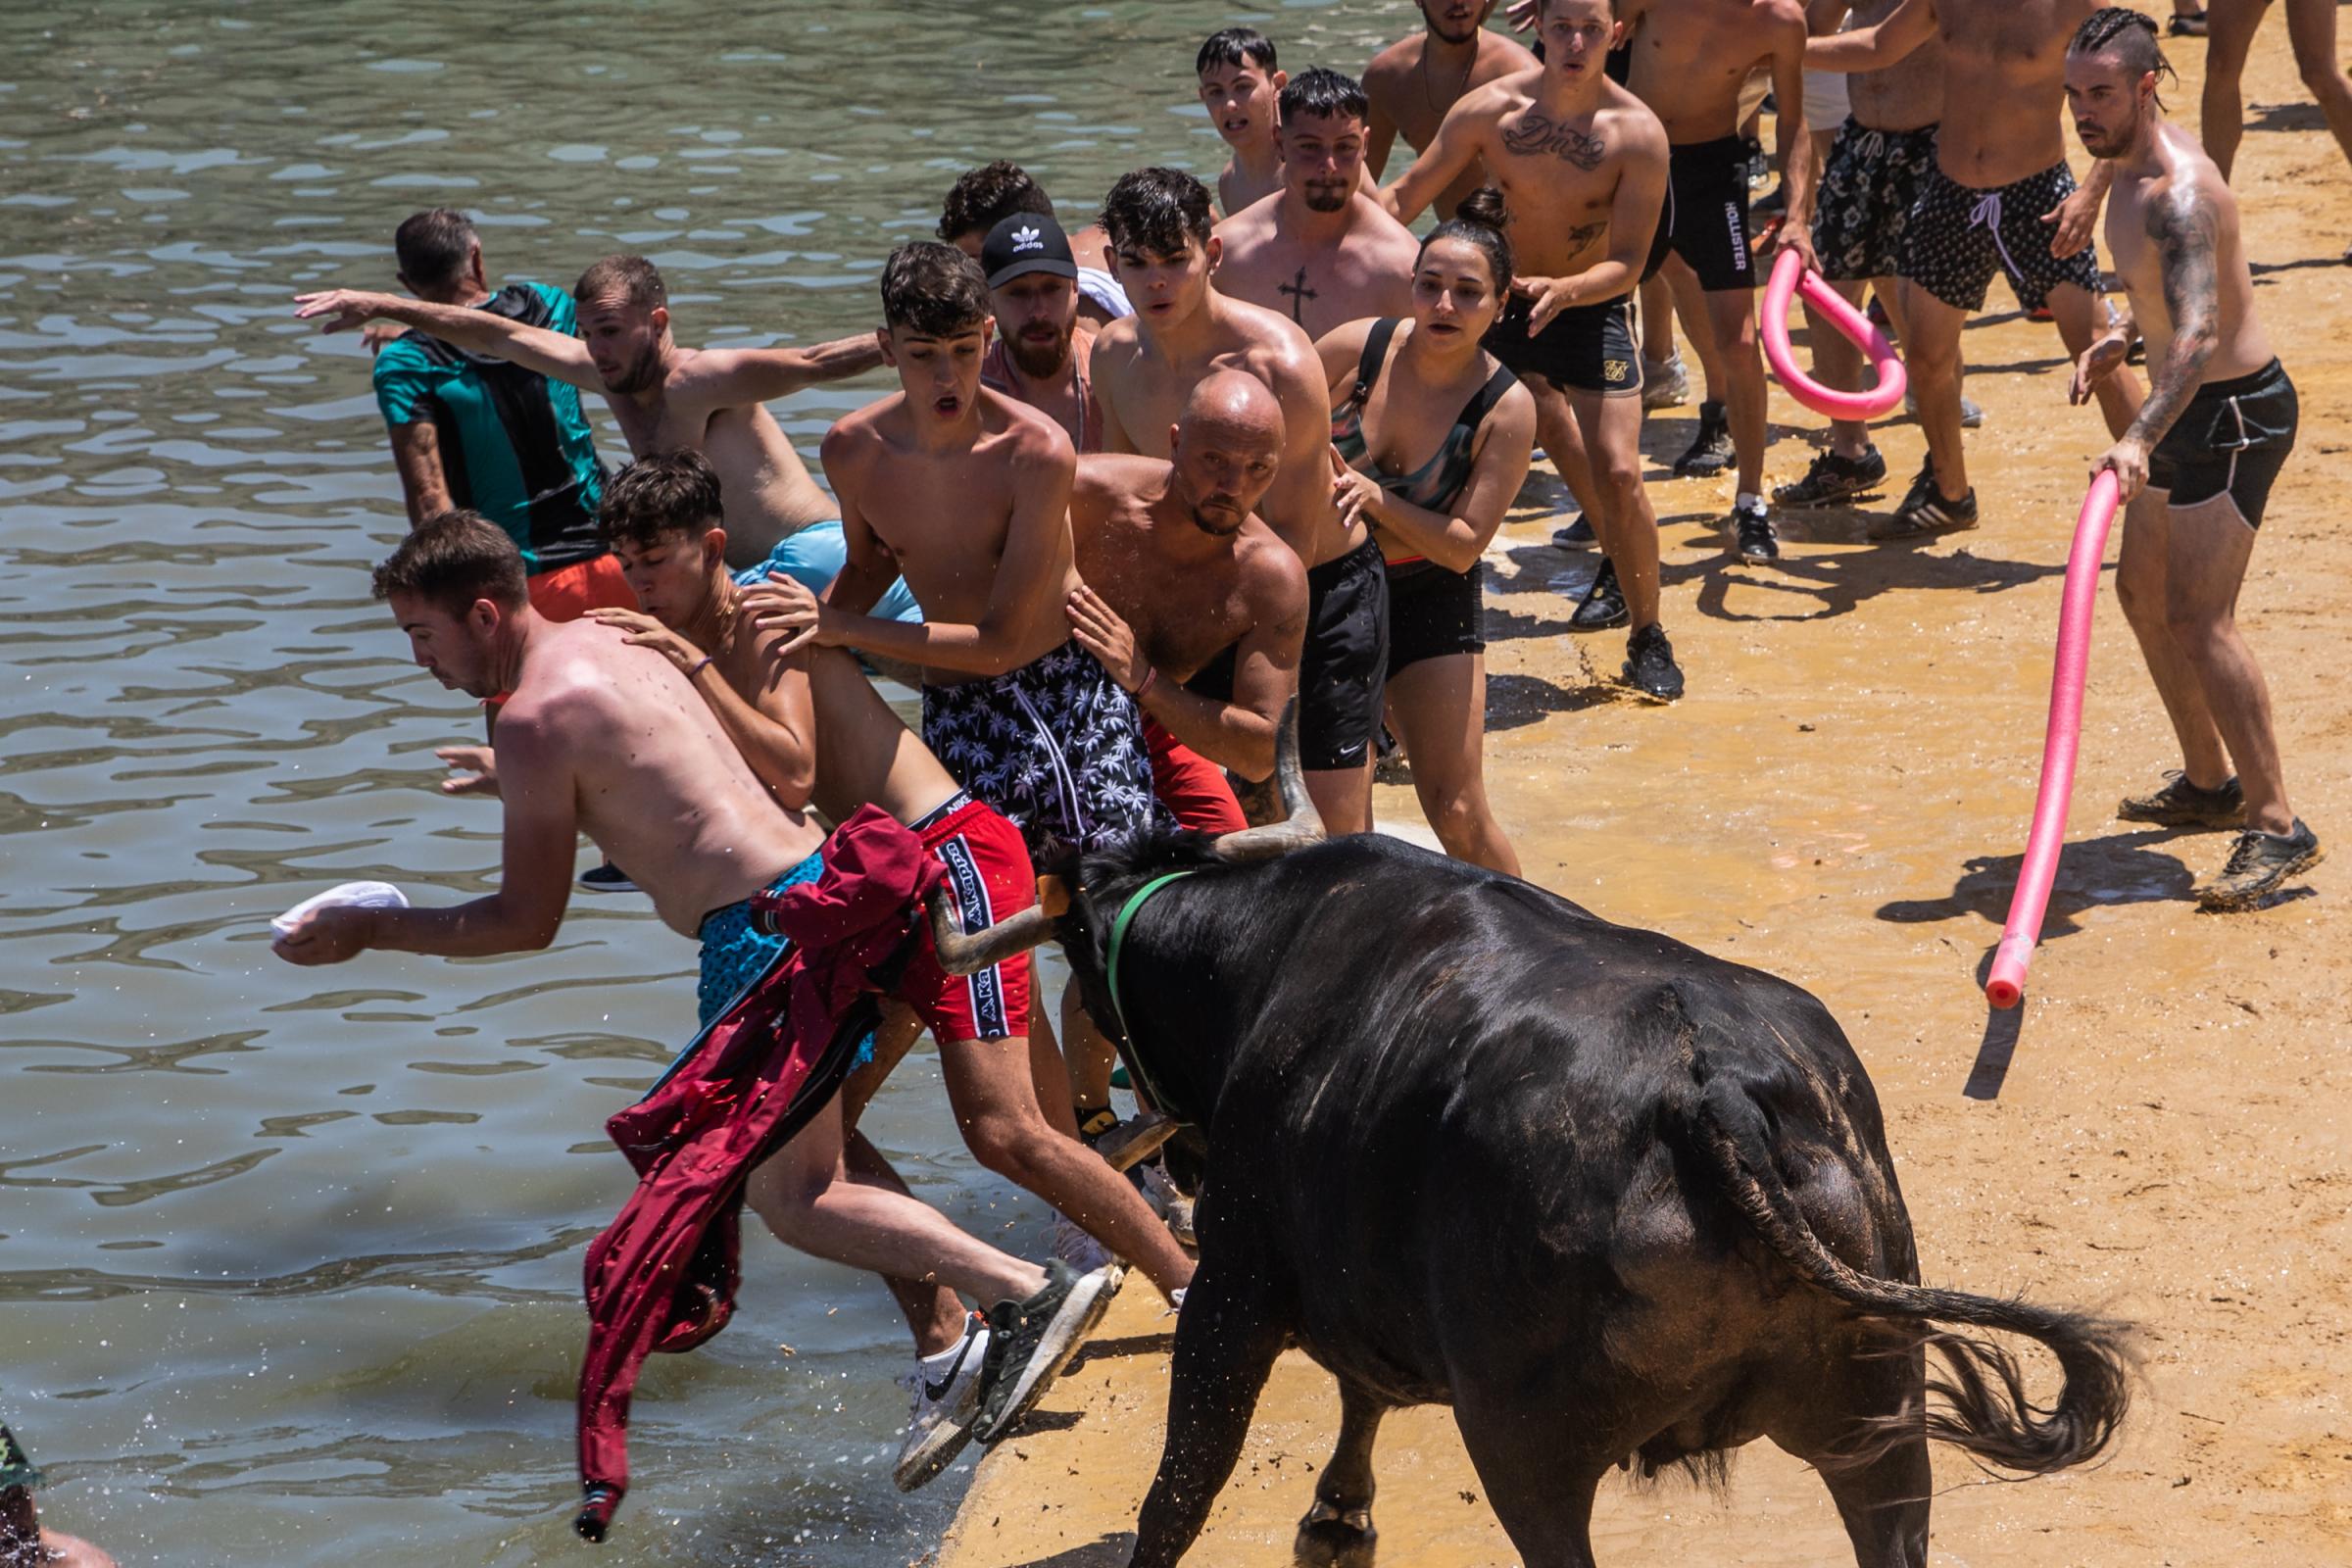 At 'Bous A La Mar', Revelers Take Plunge To Dodge Bulls And Beat The Heat - DENIA, SPAIN - JULY 17: Participants have fun with the...